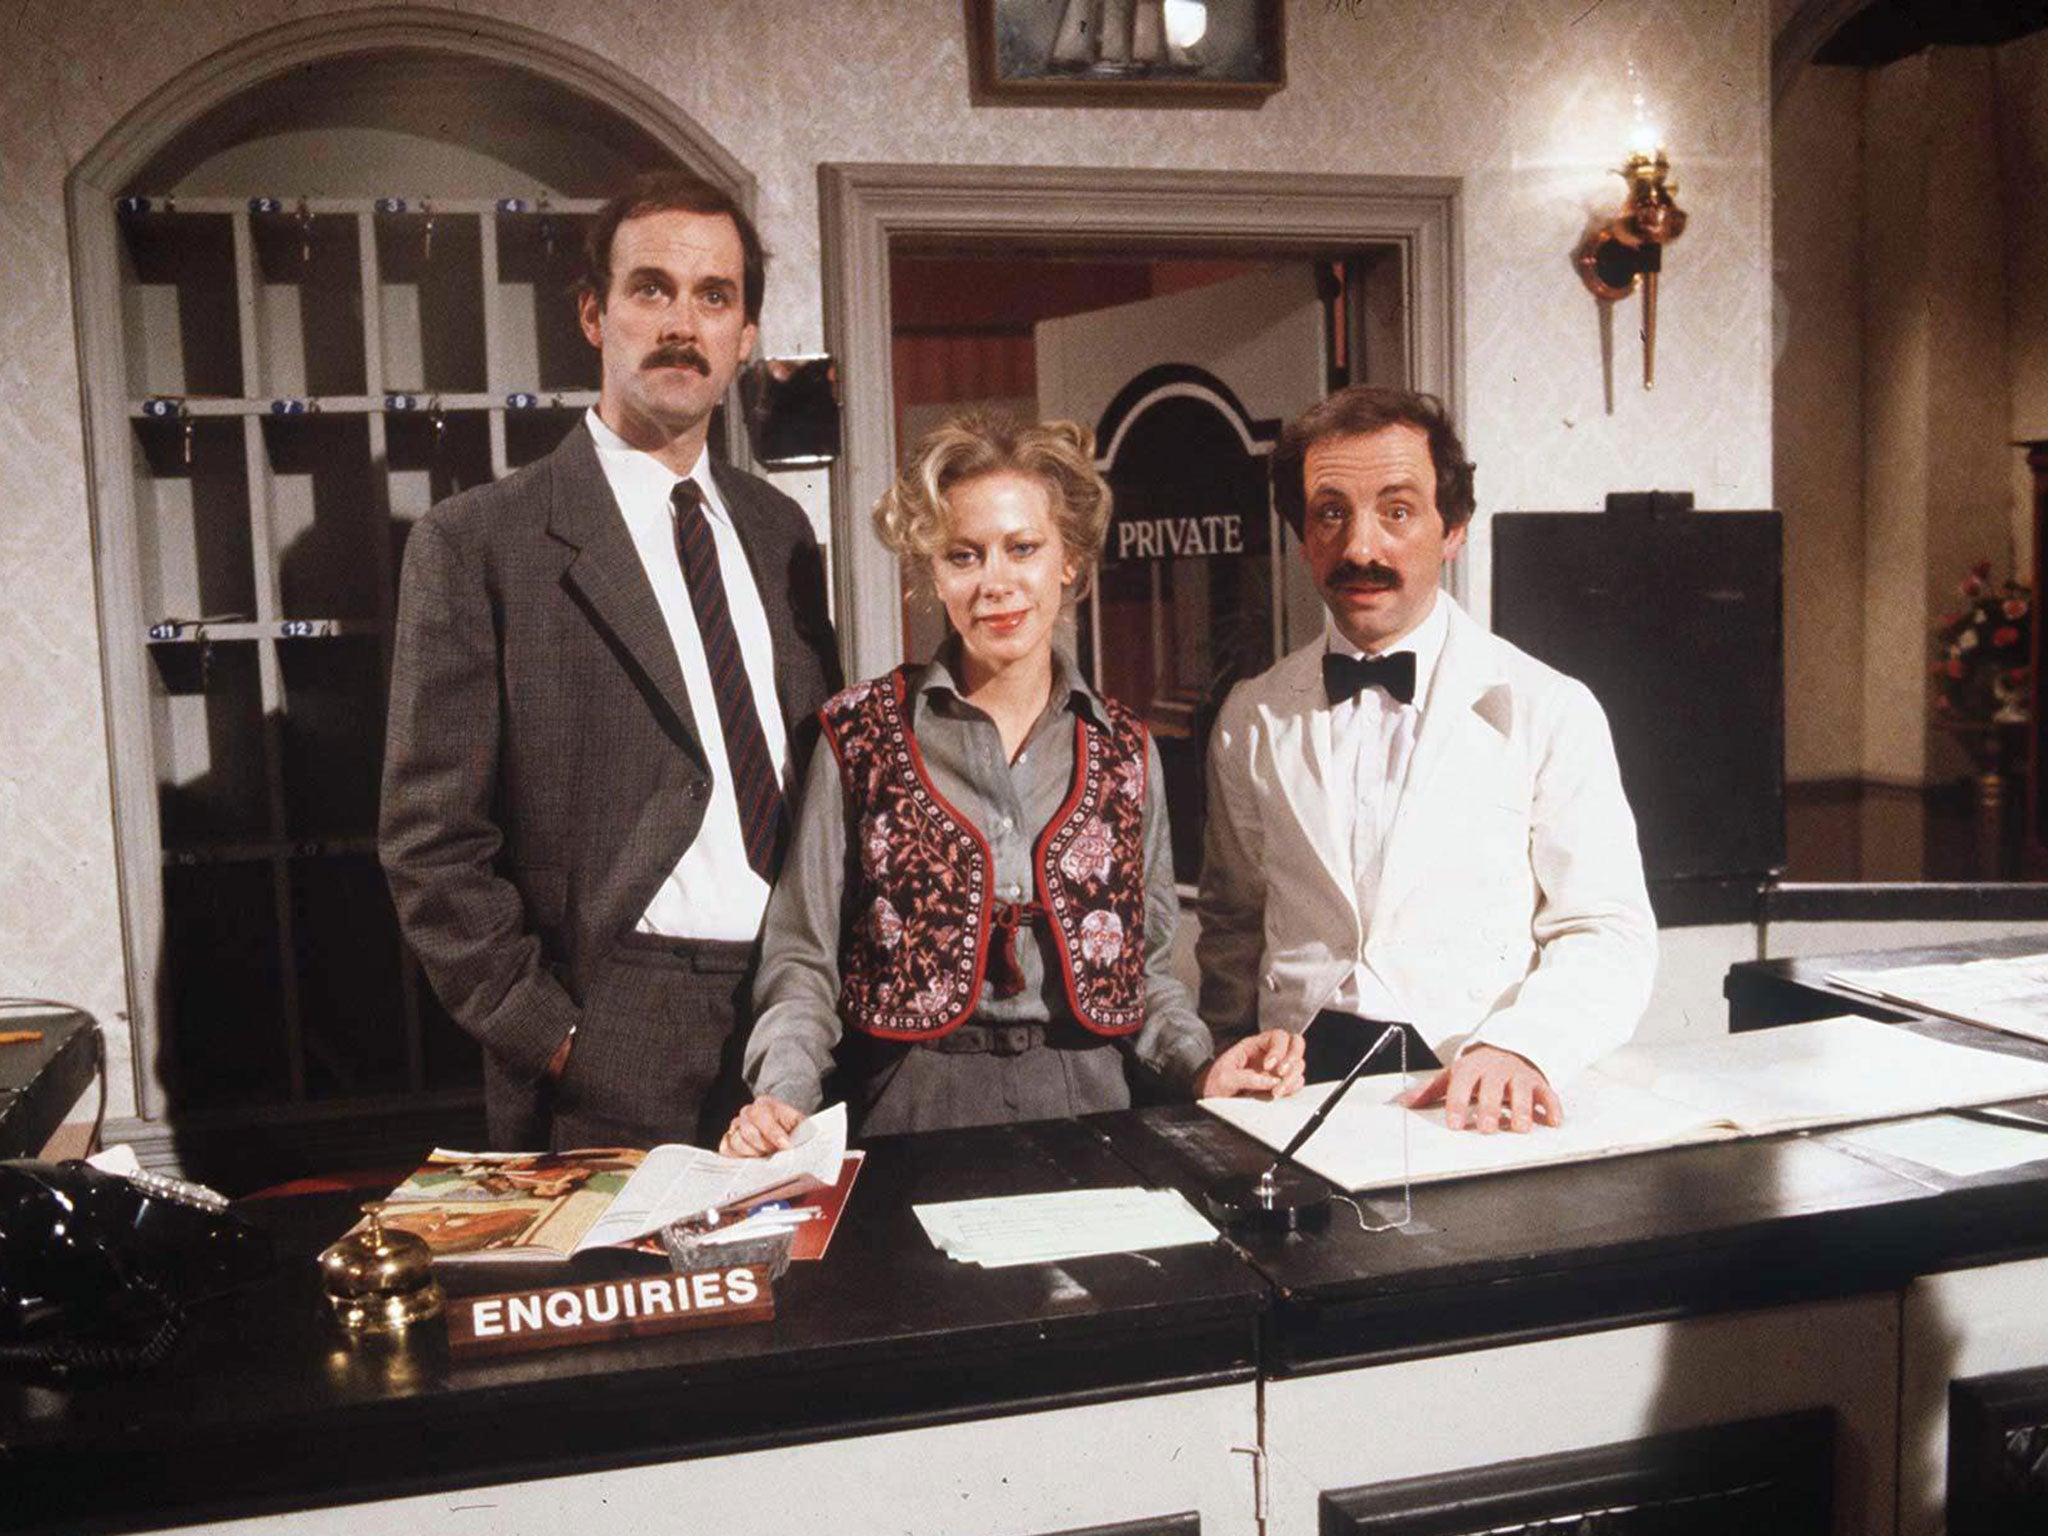 Inventive, inspired, ingenious sarcasm: The cast of Fawlty Towers